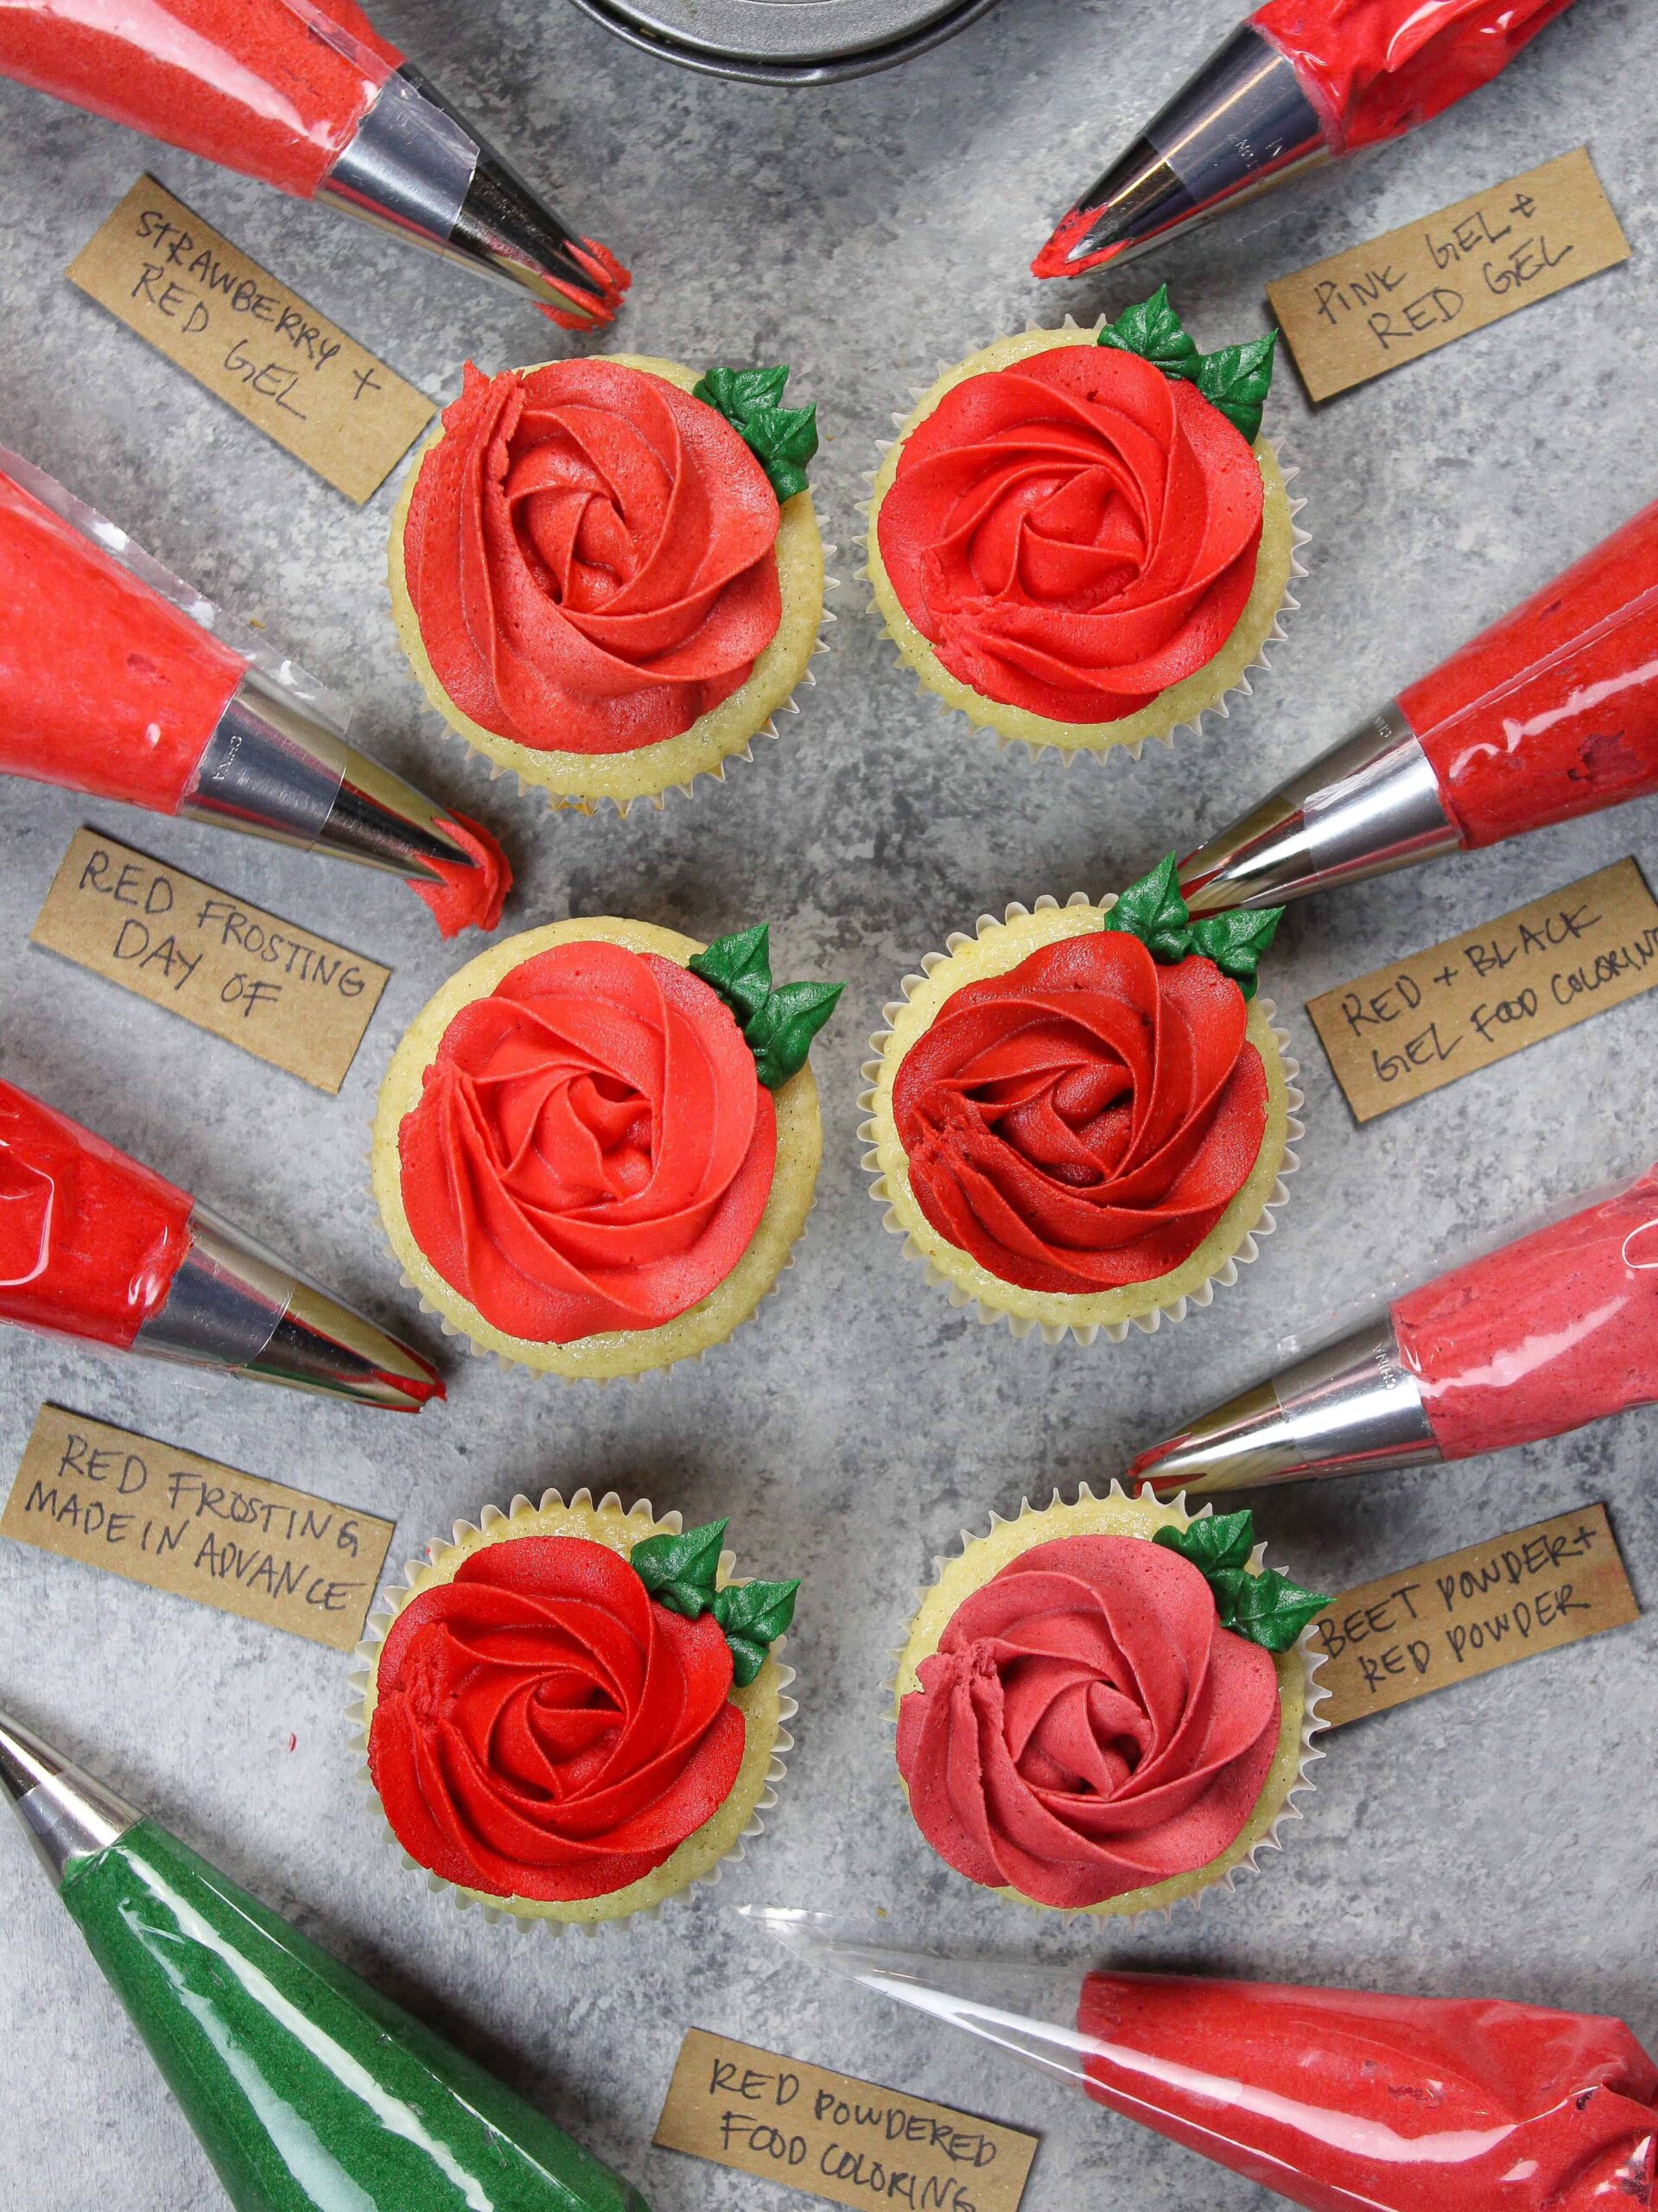 image of red buttercream made with different types of food coloring, red powdered food coloring, and natural food coloring like beet powder